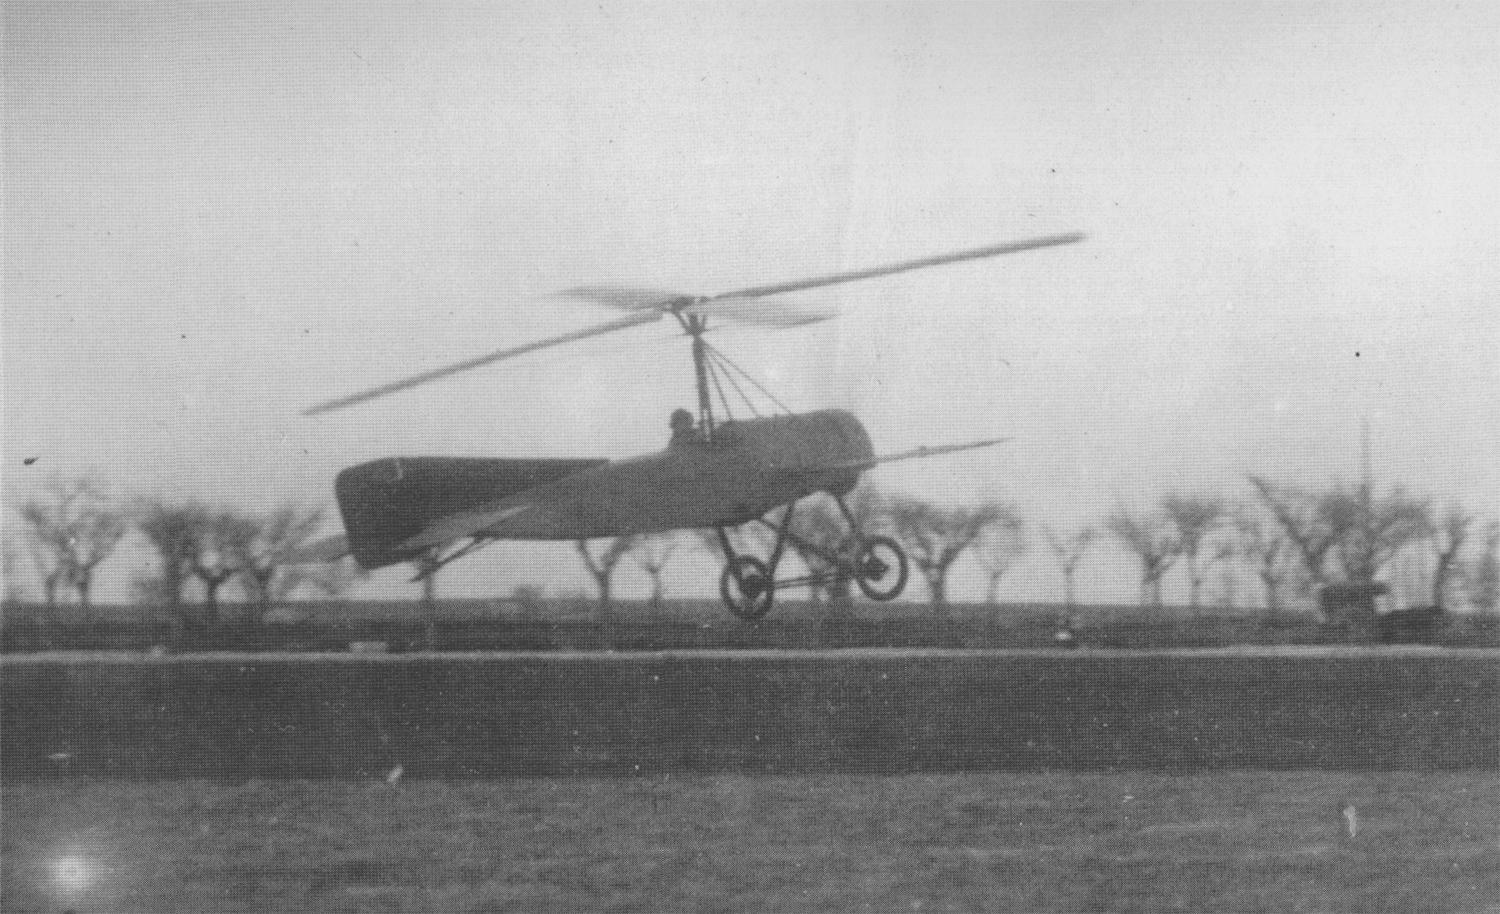 A grainy black and white photograph of an aircraft lifting off with one large rotating propeller above the pilot.